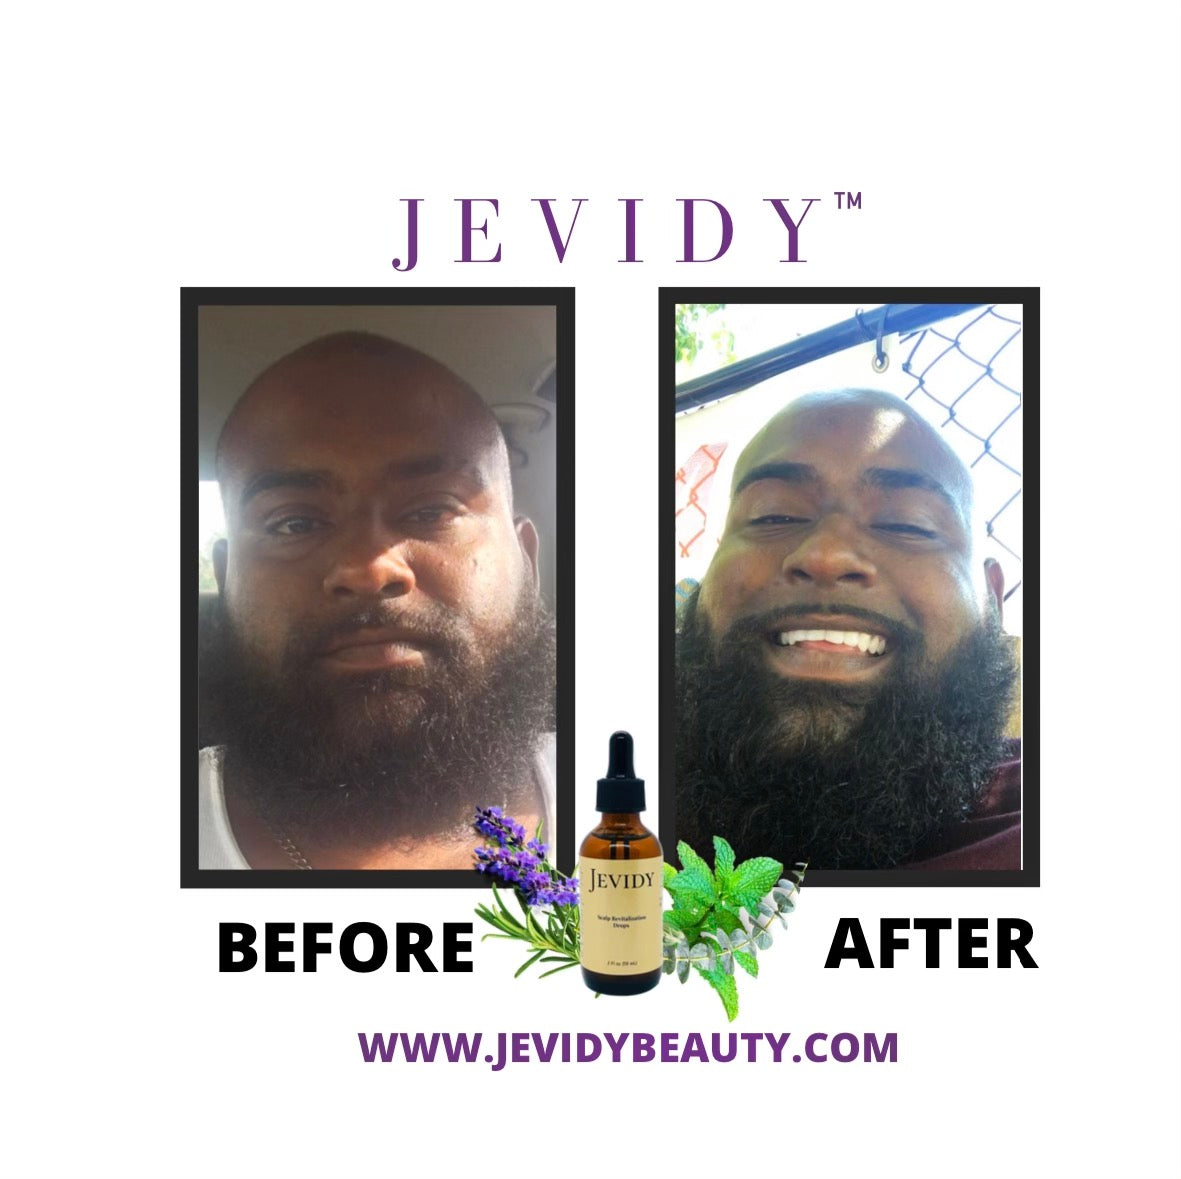 Jevidy Scalp Revitalization Drops for hair growth, moisture and length retention for beards